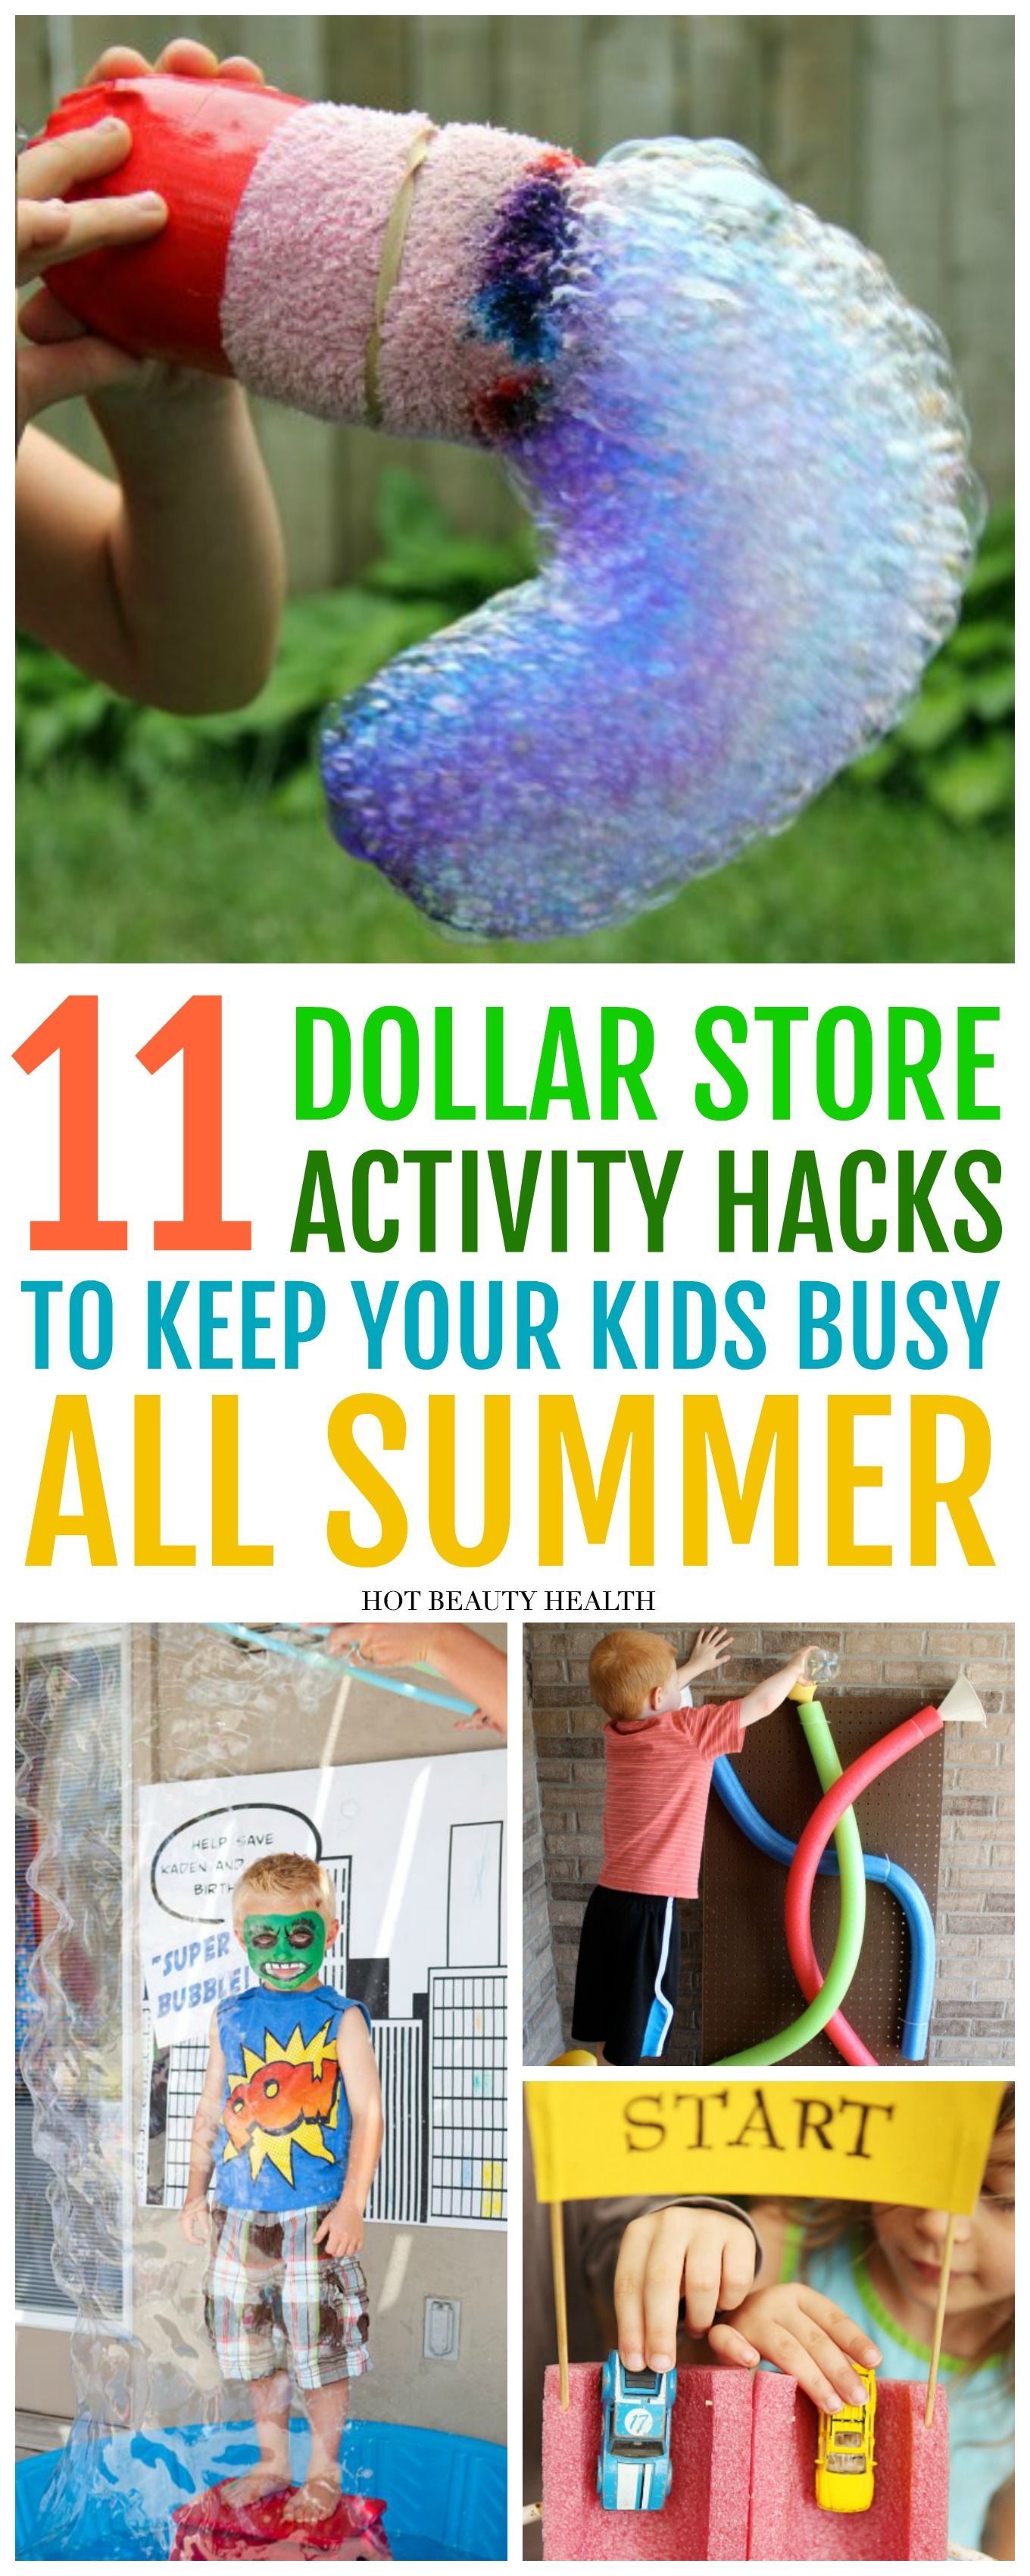 11 Fun Activities to DIY This Summer From The Dollar Store -   19 diy projects Cute fun ideas